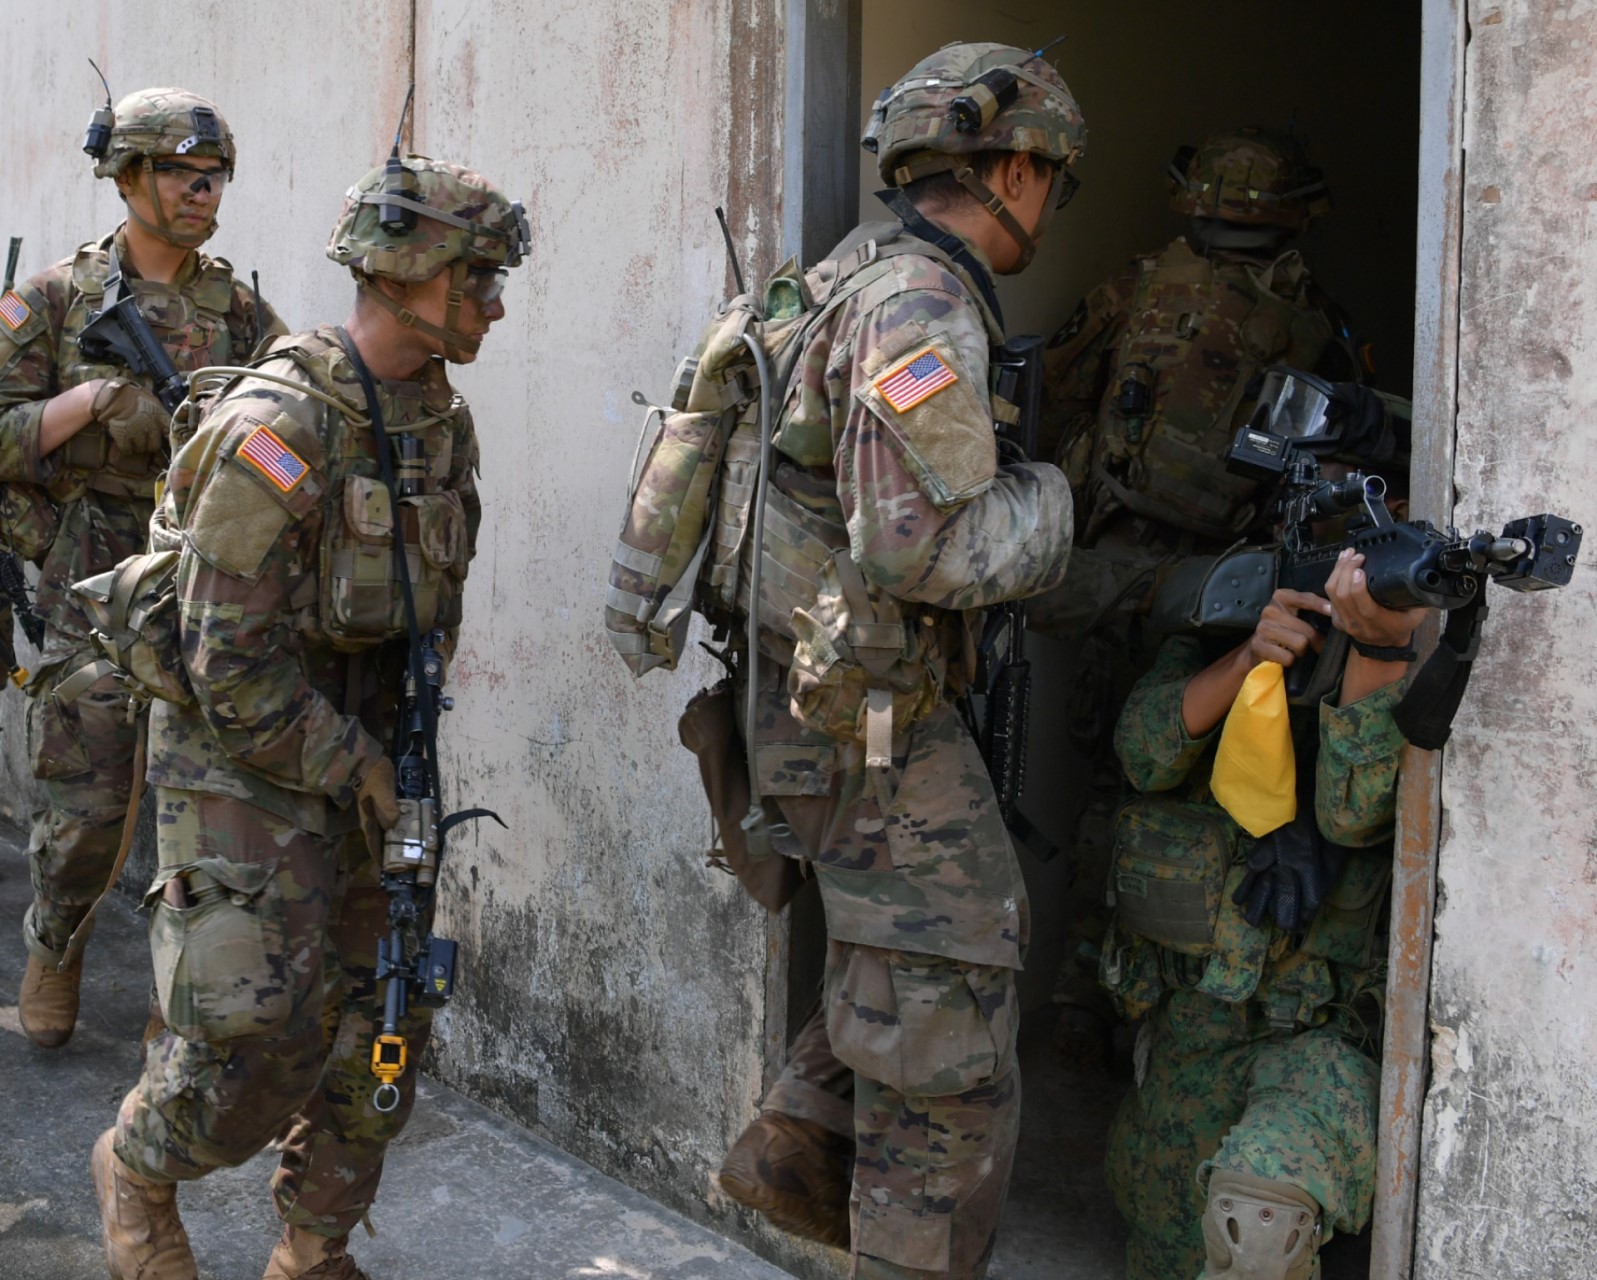 SAF and US Army personnel during the field training exercise as part of Exercise Tiger Balm 2022 (XTiB 22).